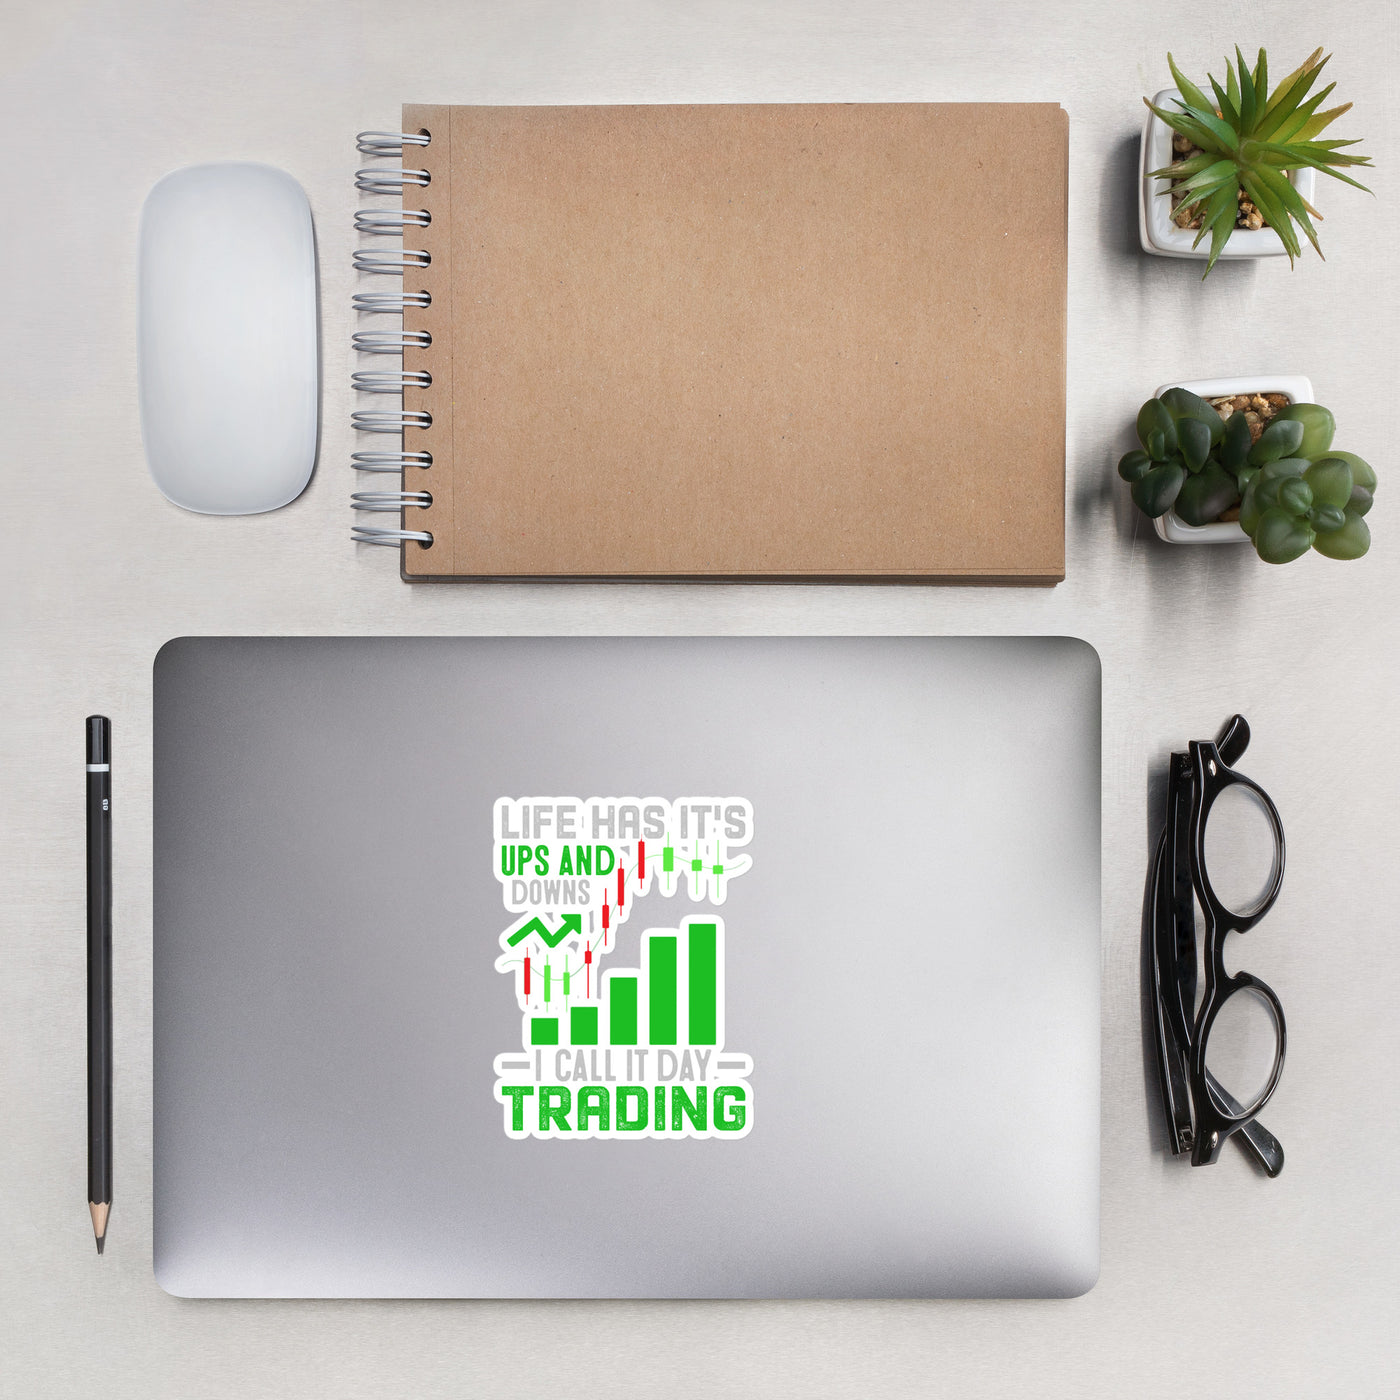 Life Has it's ups and down; I Call it Day Trading - Bubble-free stickers